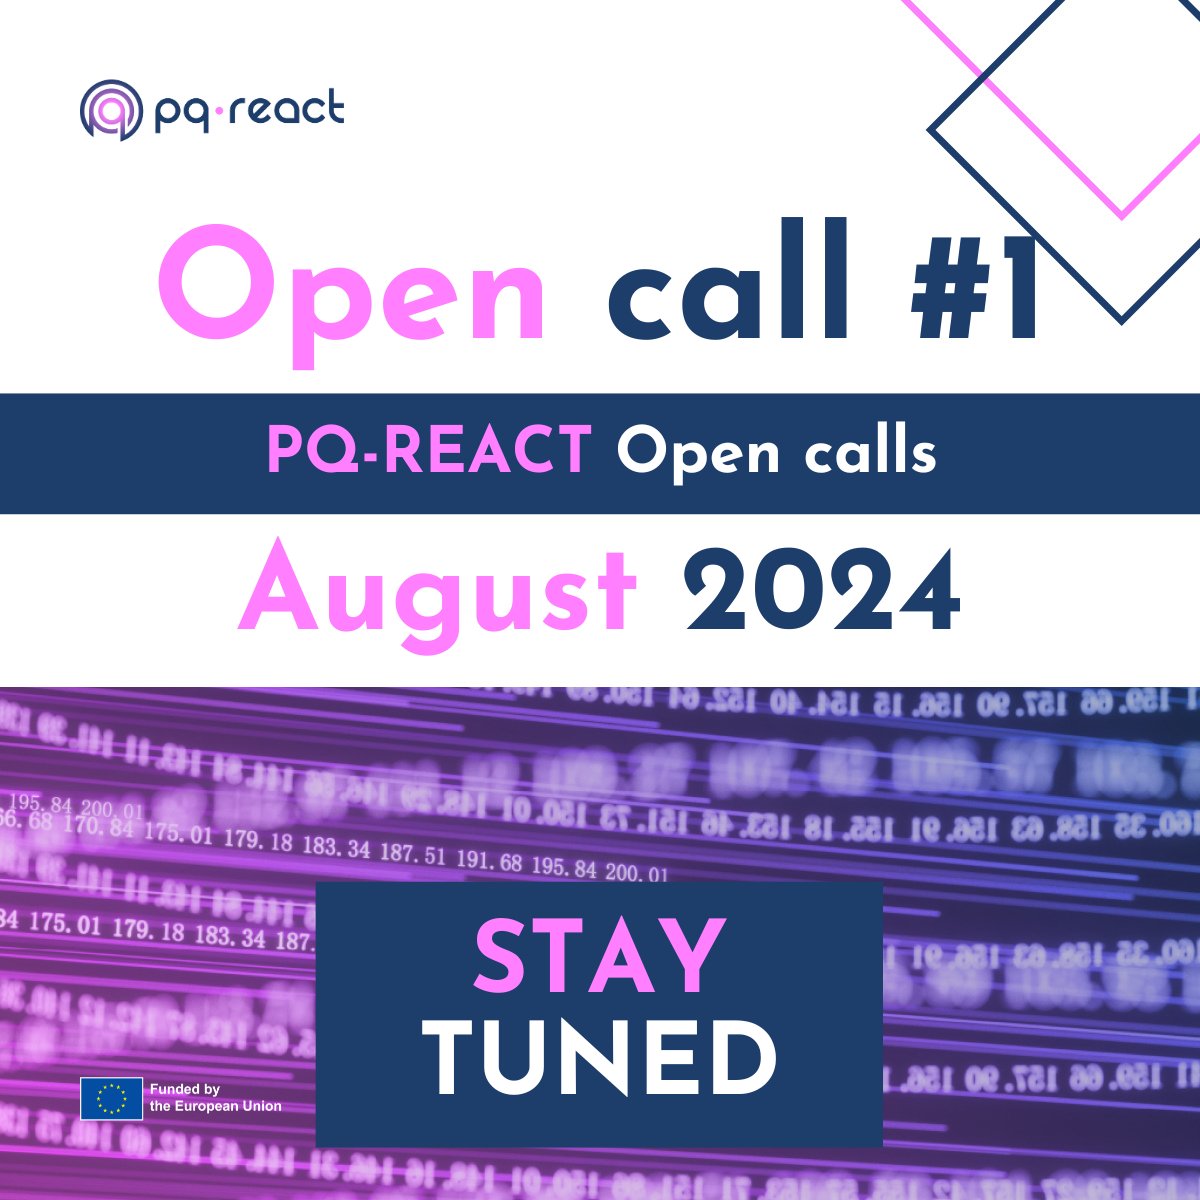 📣 Exciting news alert! @PQREACT will run 2 open calls📞that will allow selected SMEs & technology providers to obtain optimized solutions to solve #cryptographic encryptions based on classic algorithms that currently protect #data & infrastructure! 👉Stay tuned with PQ-REACT❗️